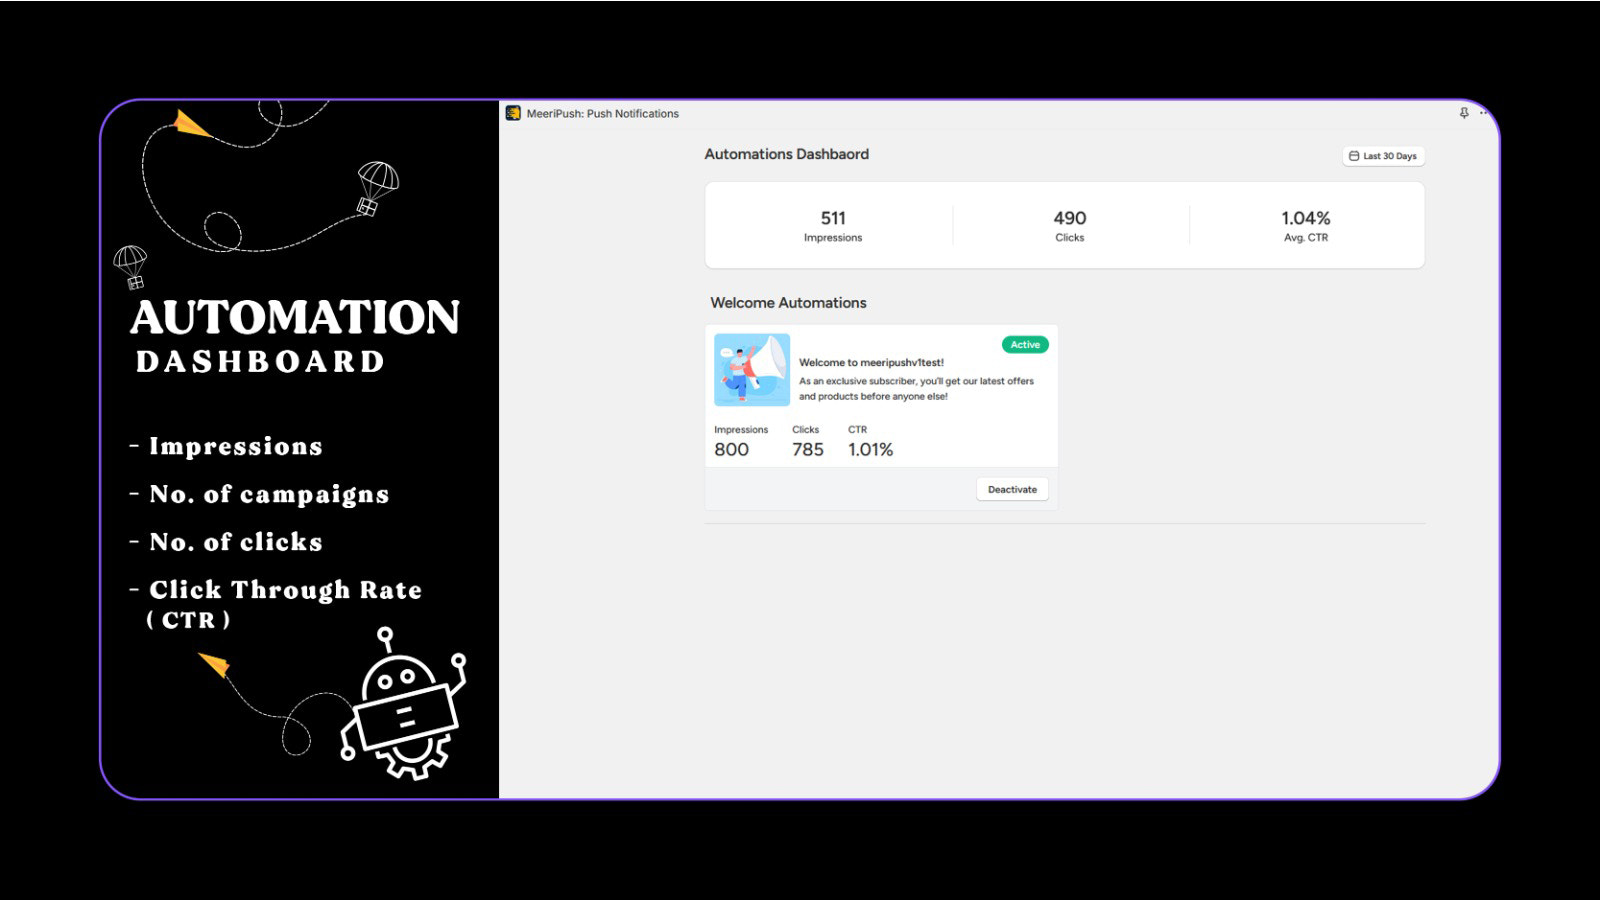 Automations dashboard